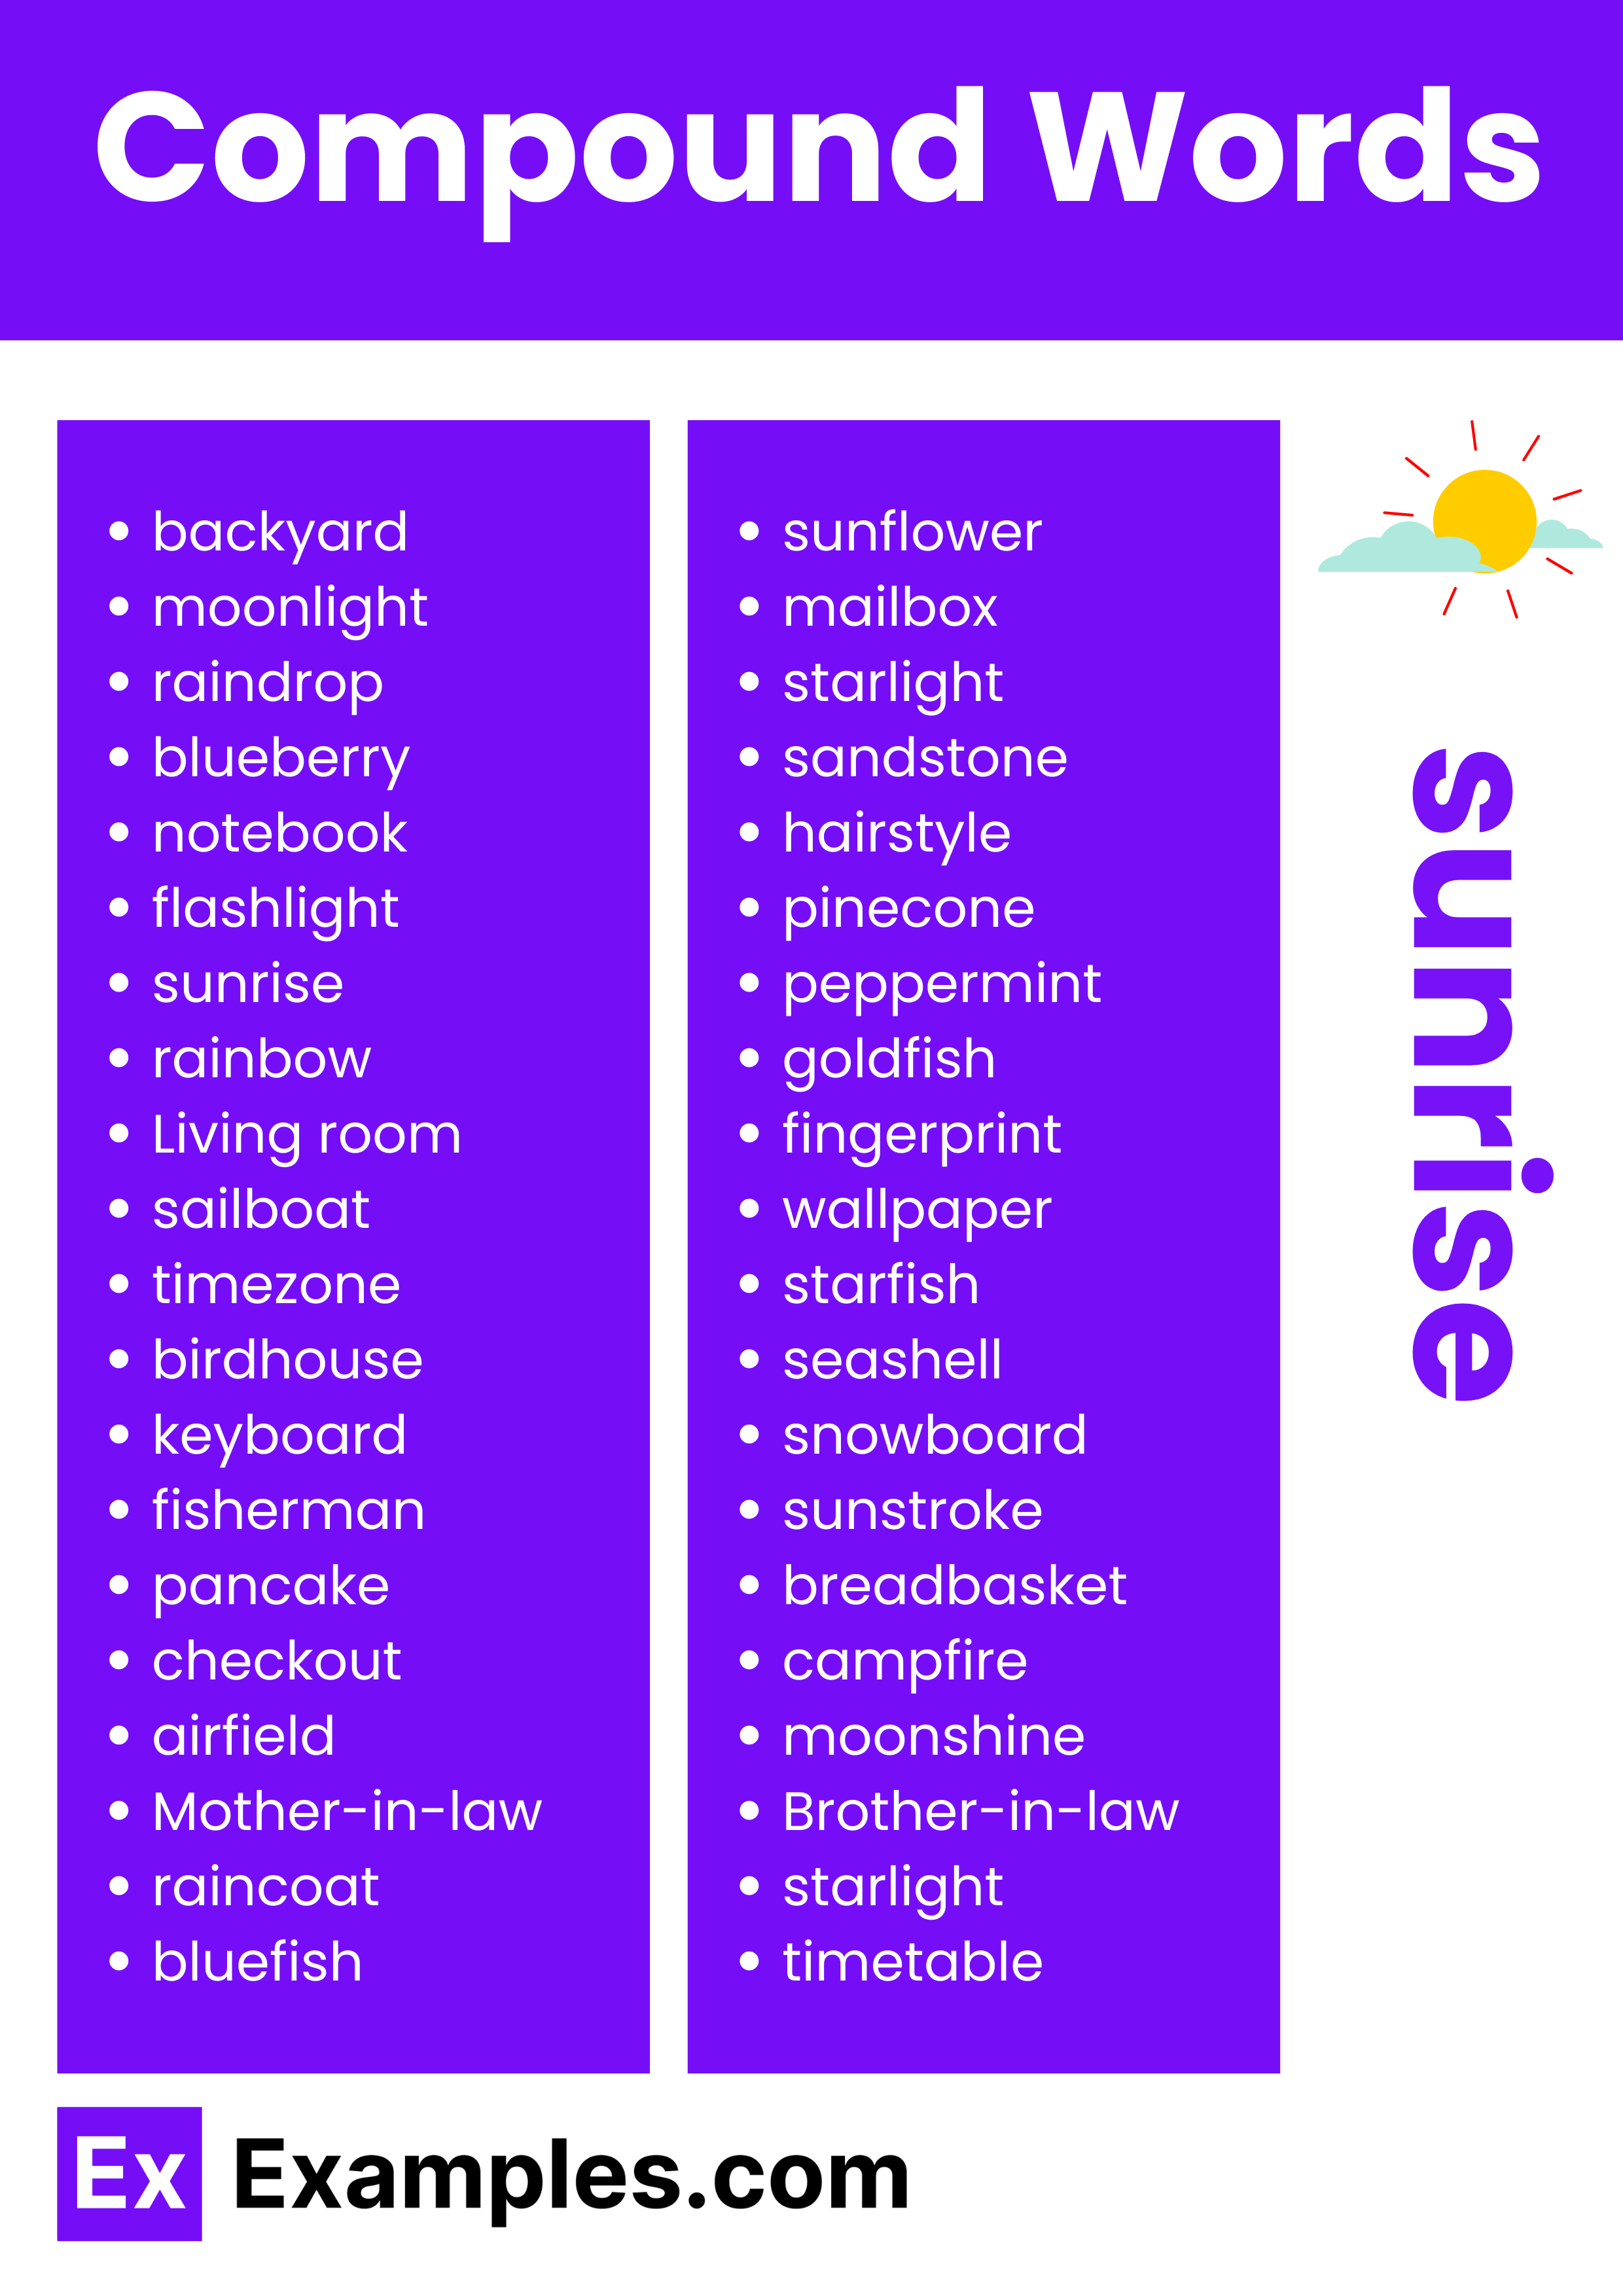 commonly used a compound words